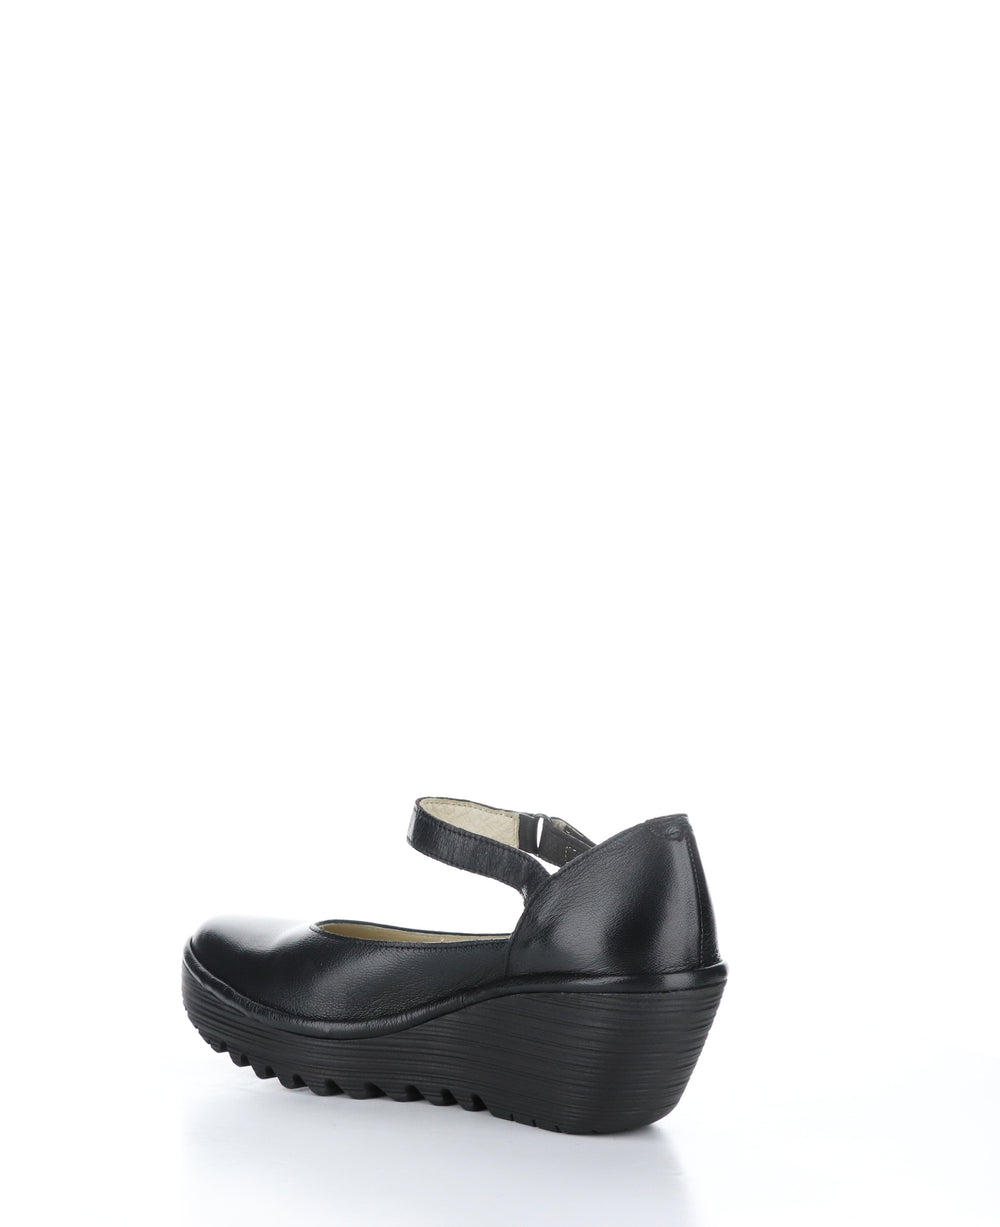 YAWO345FLY Black Round Toe Shoes|YAWO345FLY Chaussures à Bout Rond in Noir